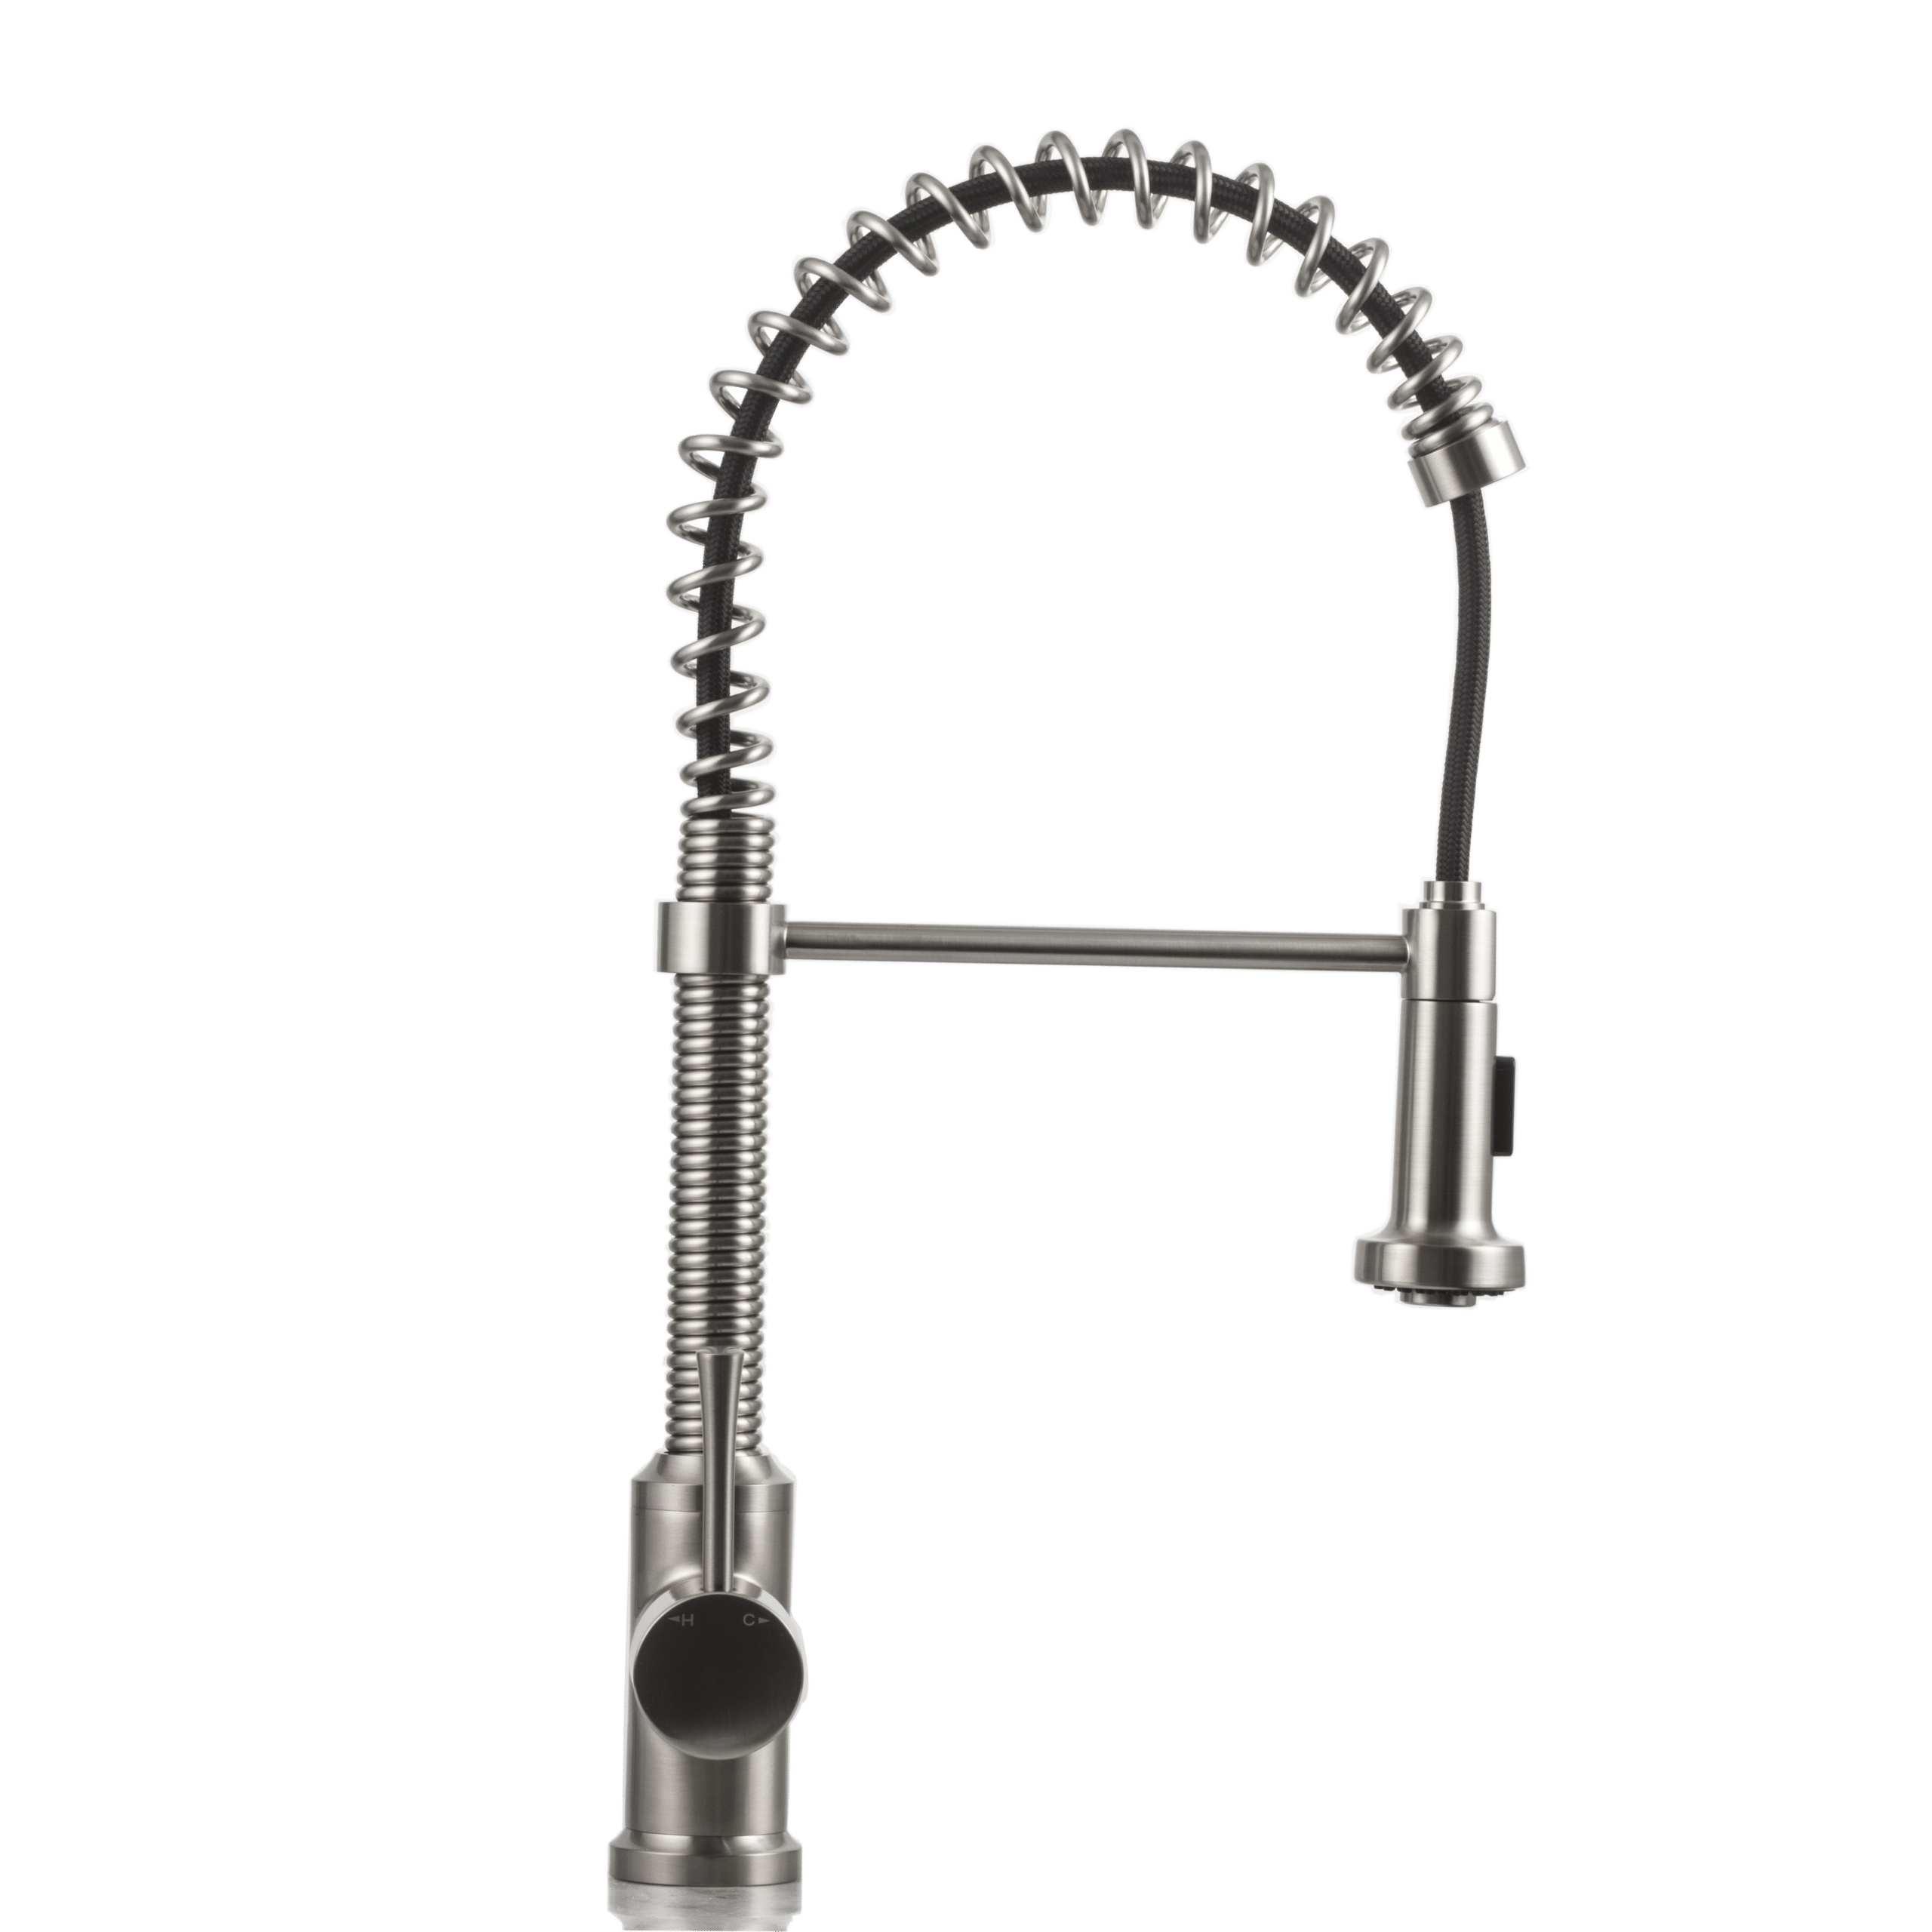 Coil Spring Kitchen Faucet Kf100bn Strictly Sinks